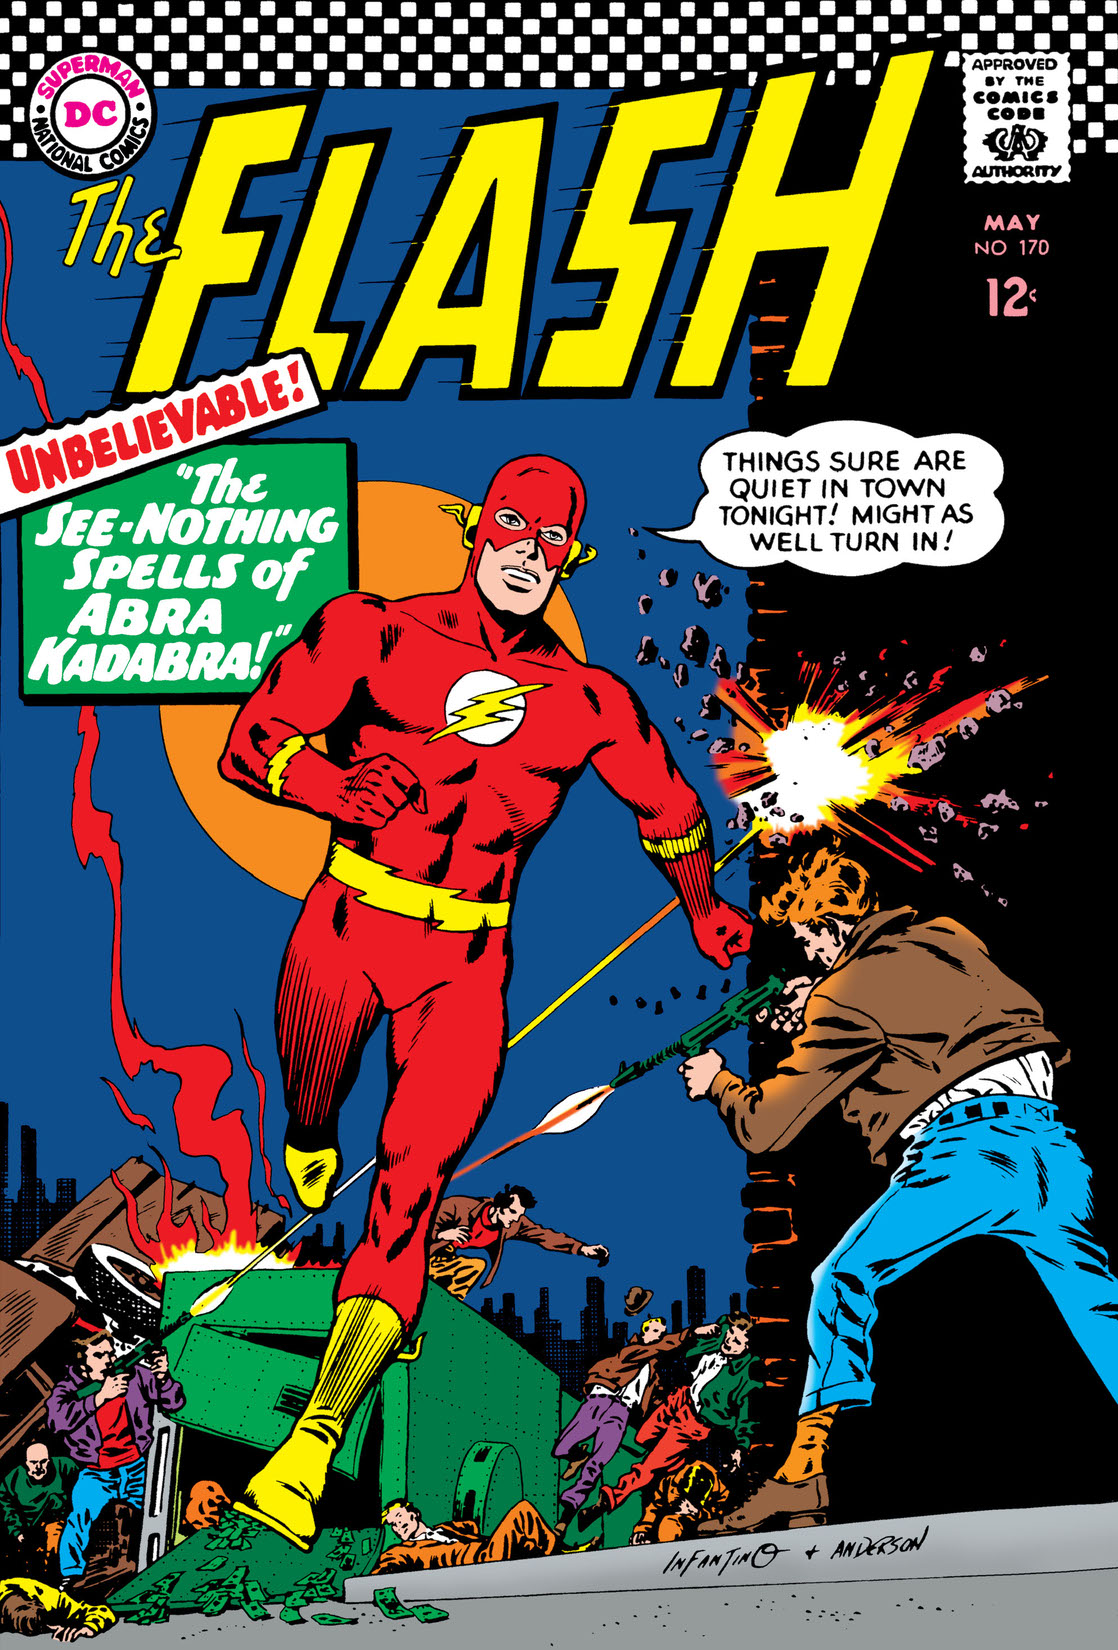 The Flash (1959-) #170 preview images